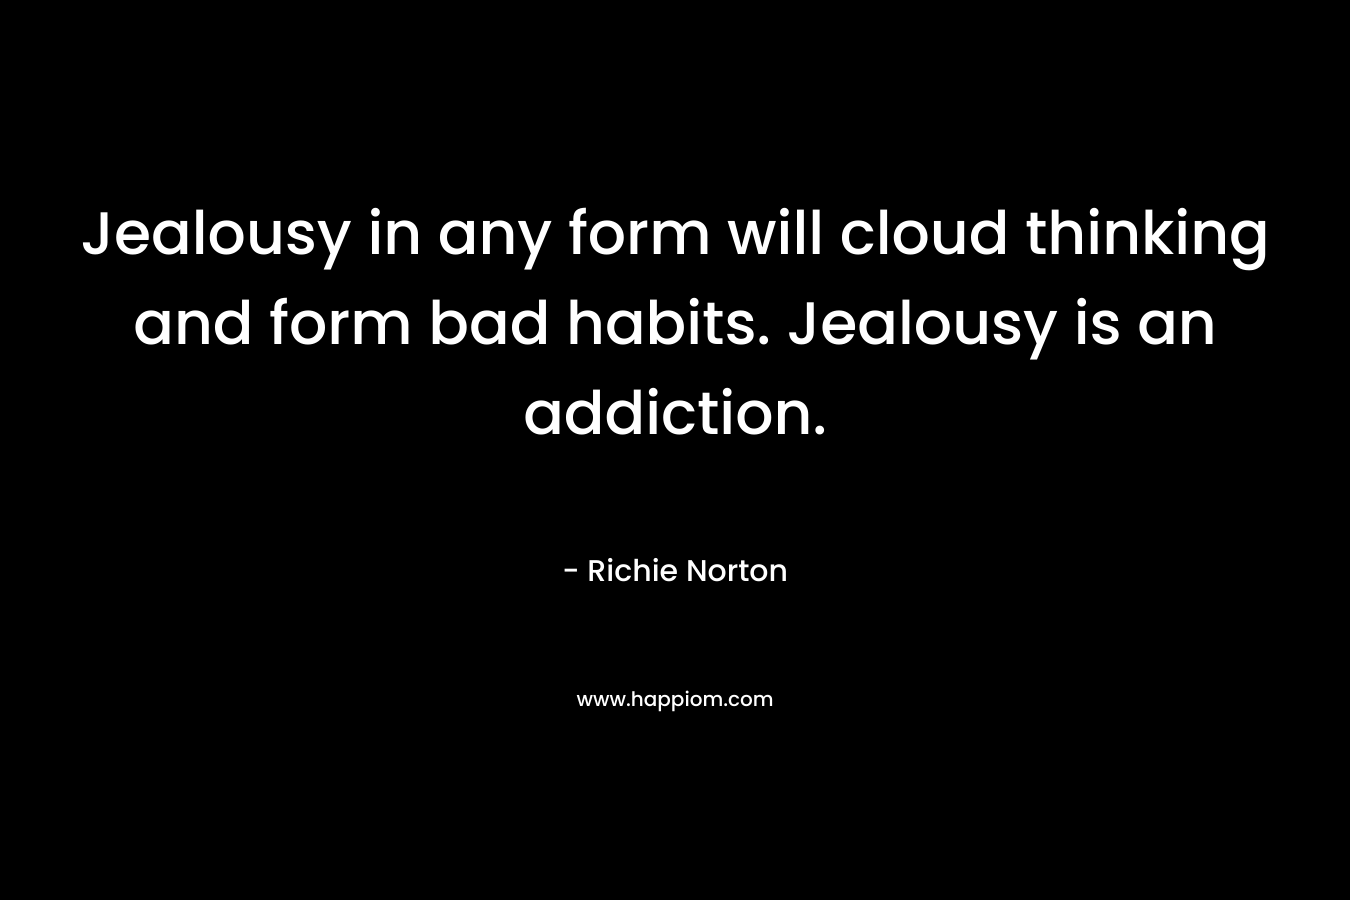 Jealousy in any form will cloud thinking and form bad habits. Jealousy is an addiction. – Richie Norton